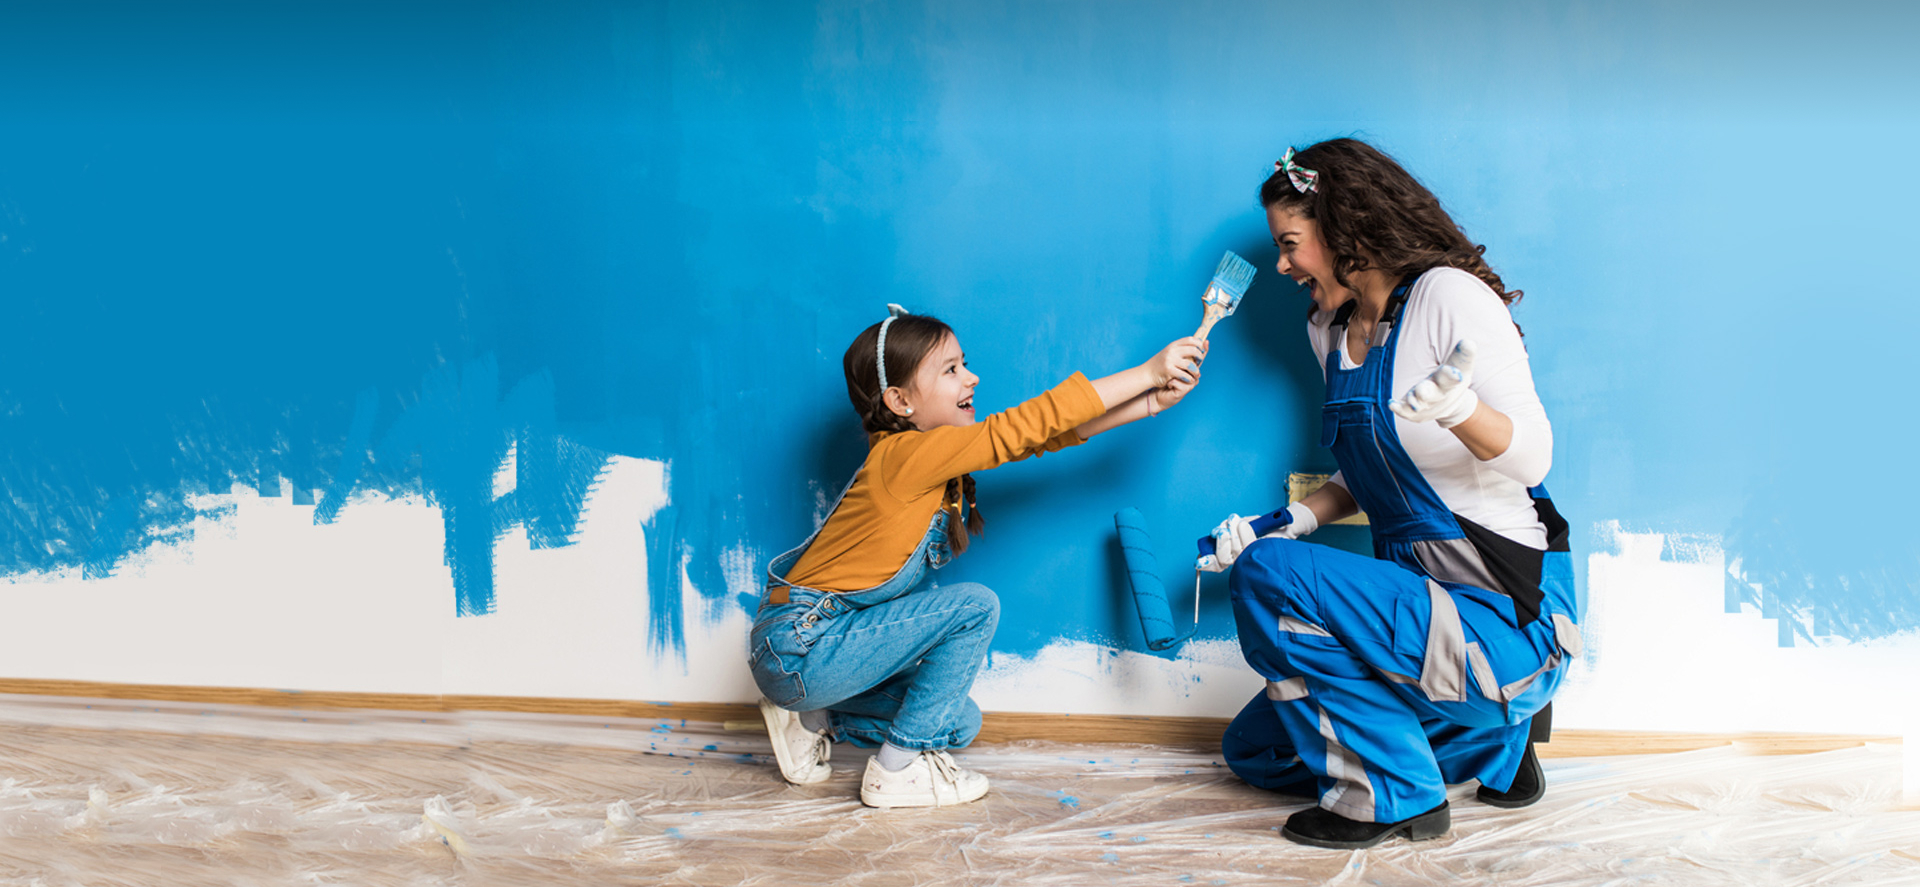 A Little Girl and Her Mother Painting Wall and Smiling at Each Other